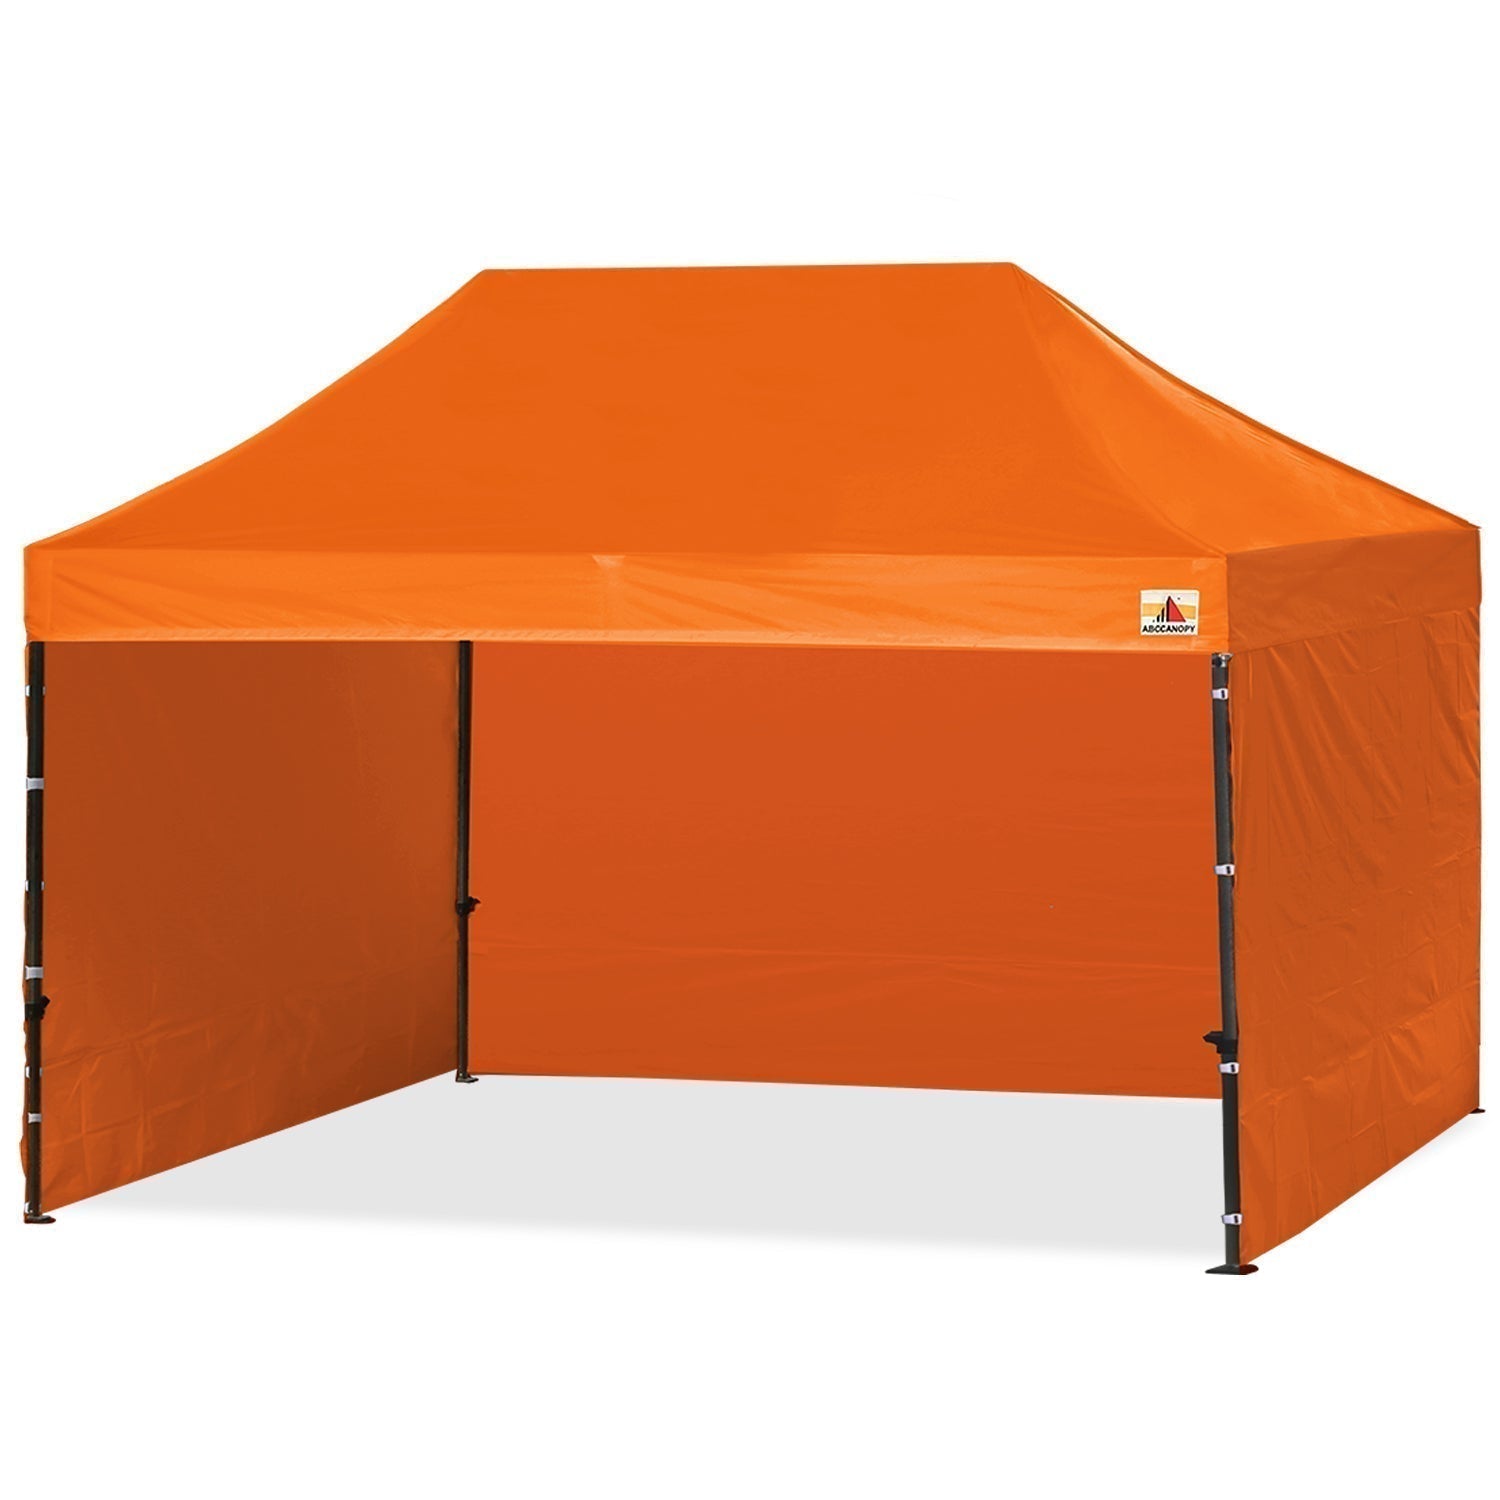 S1 Commercial Pop Up Canopy Tent with Sidewalls 10x15 Instant Shelter